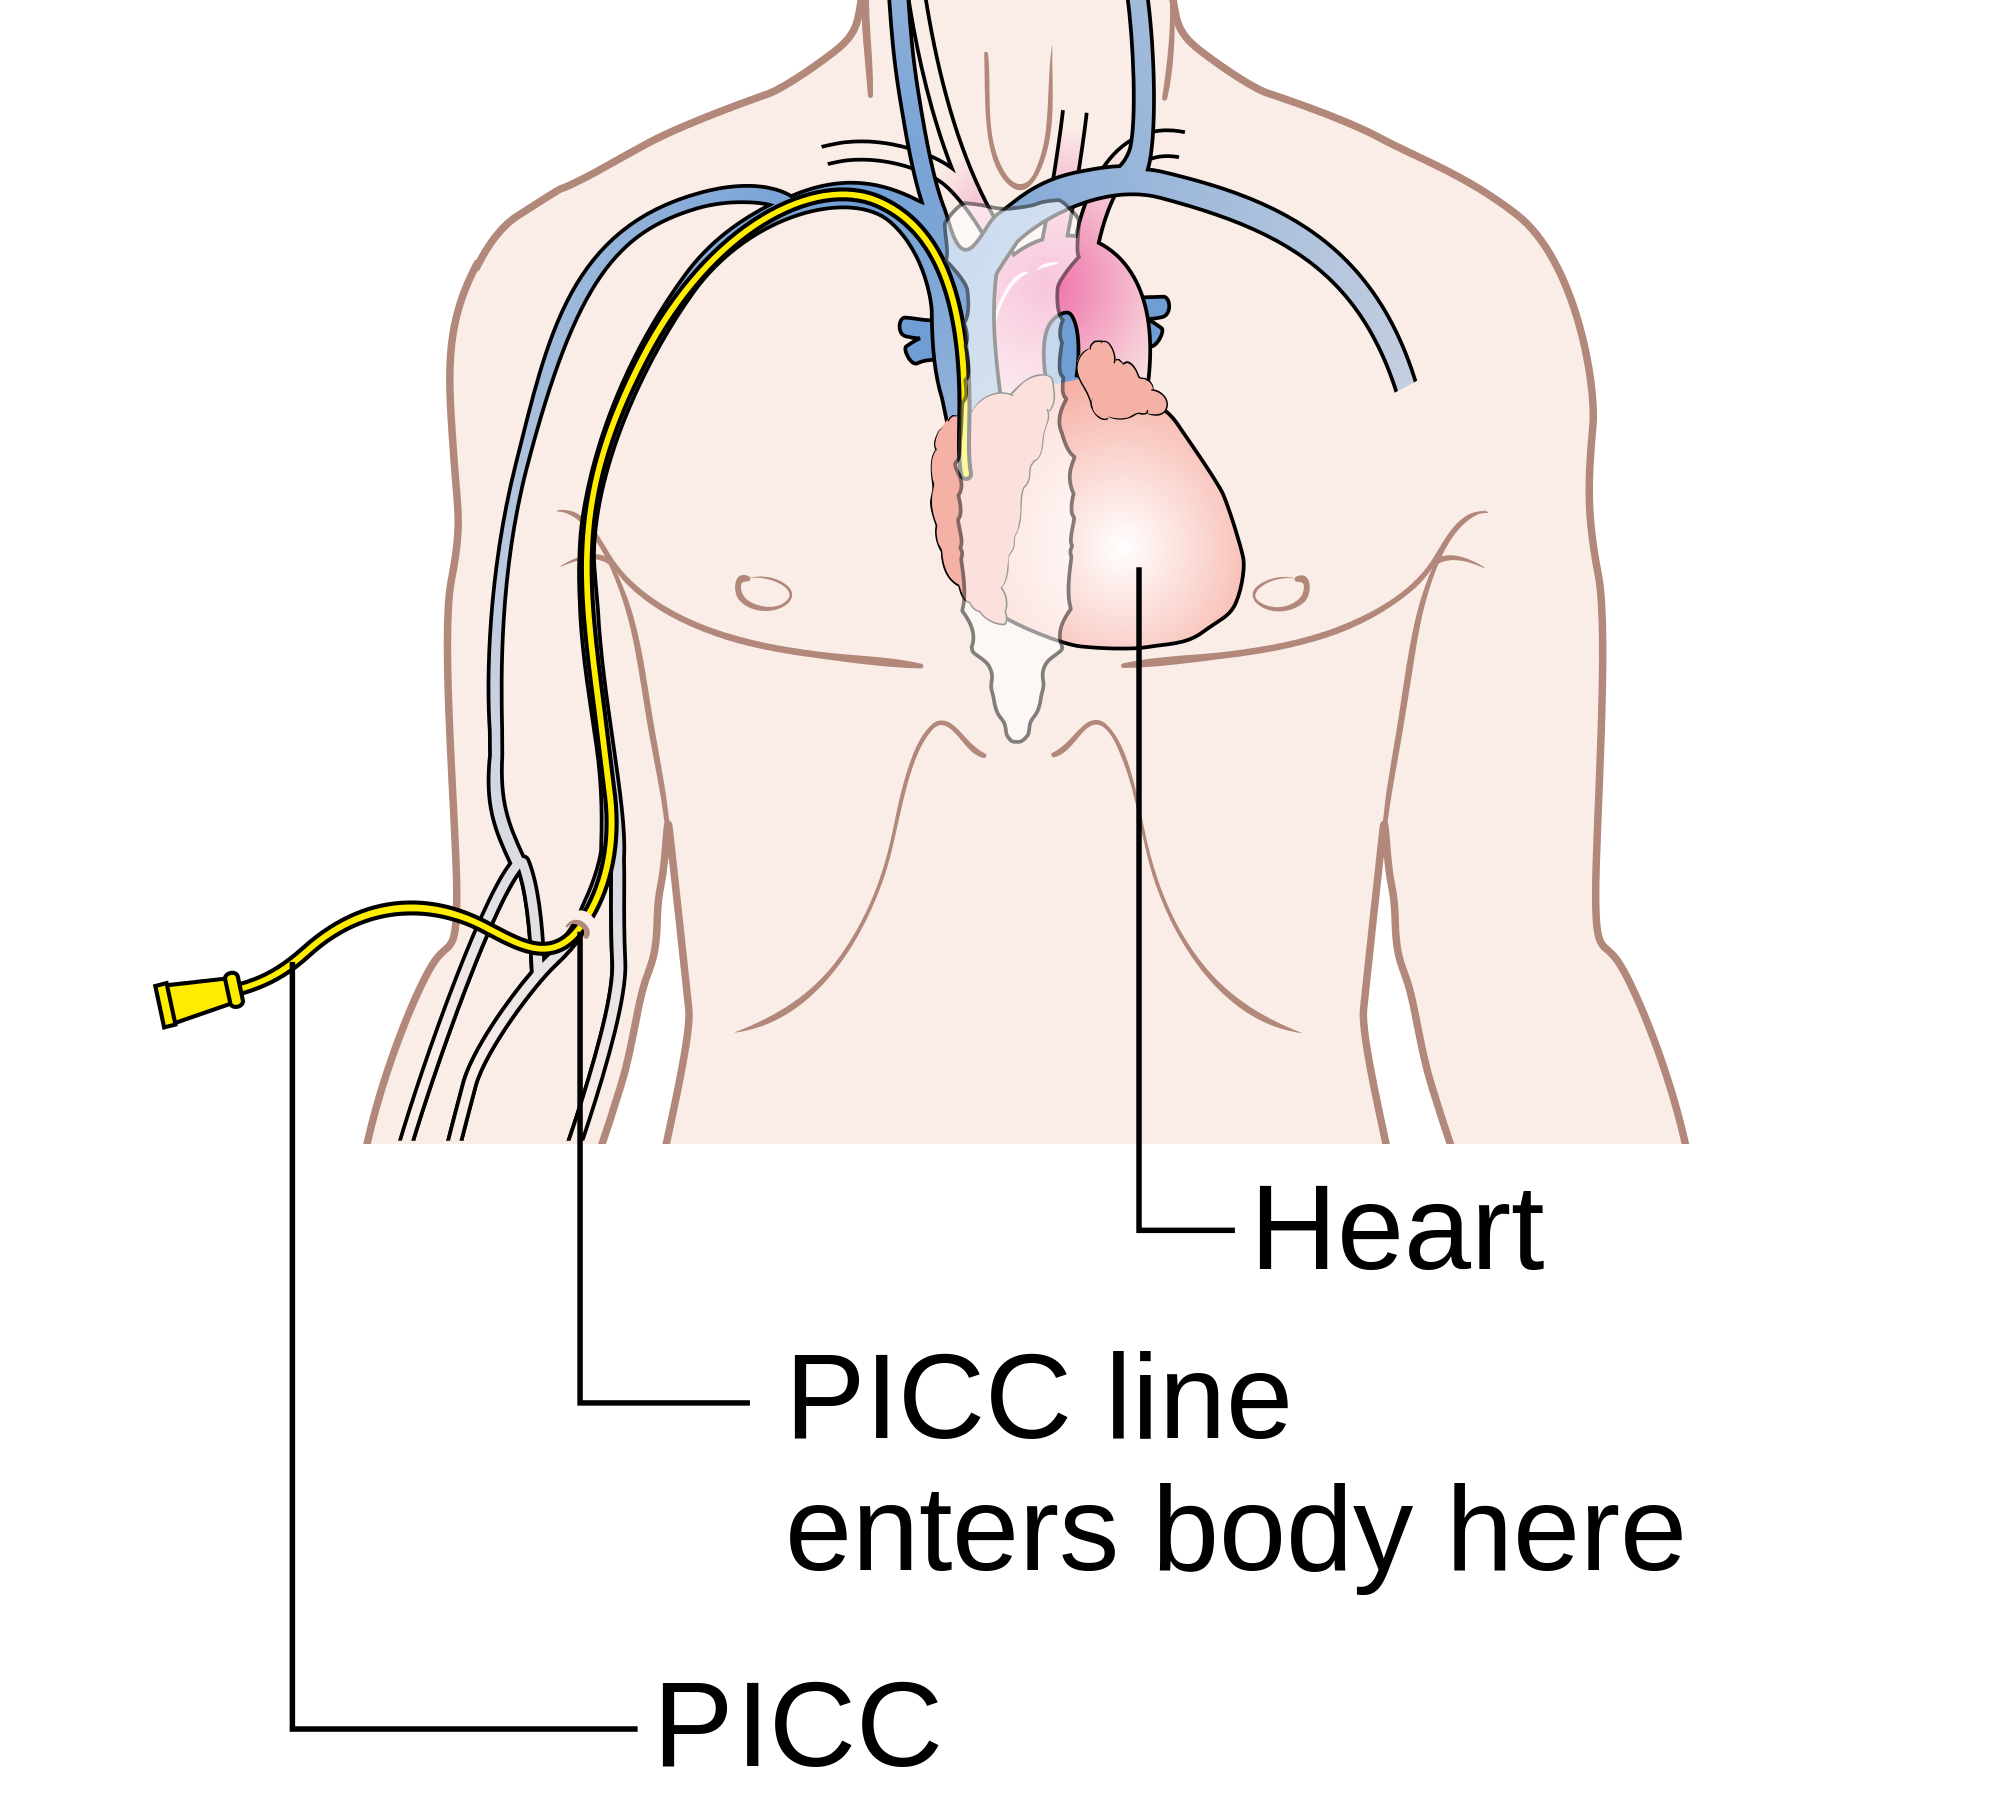 Complications And Care Of Peripherally Inserted Central Catheters Picc Line New Health Advisor